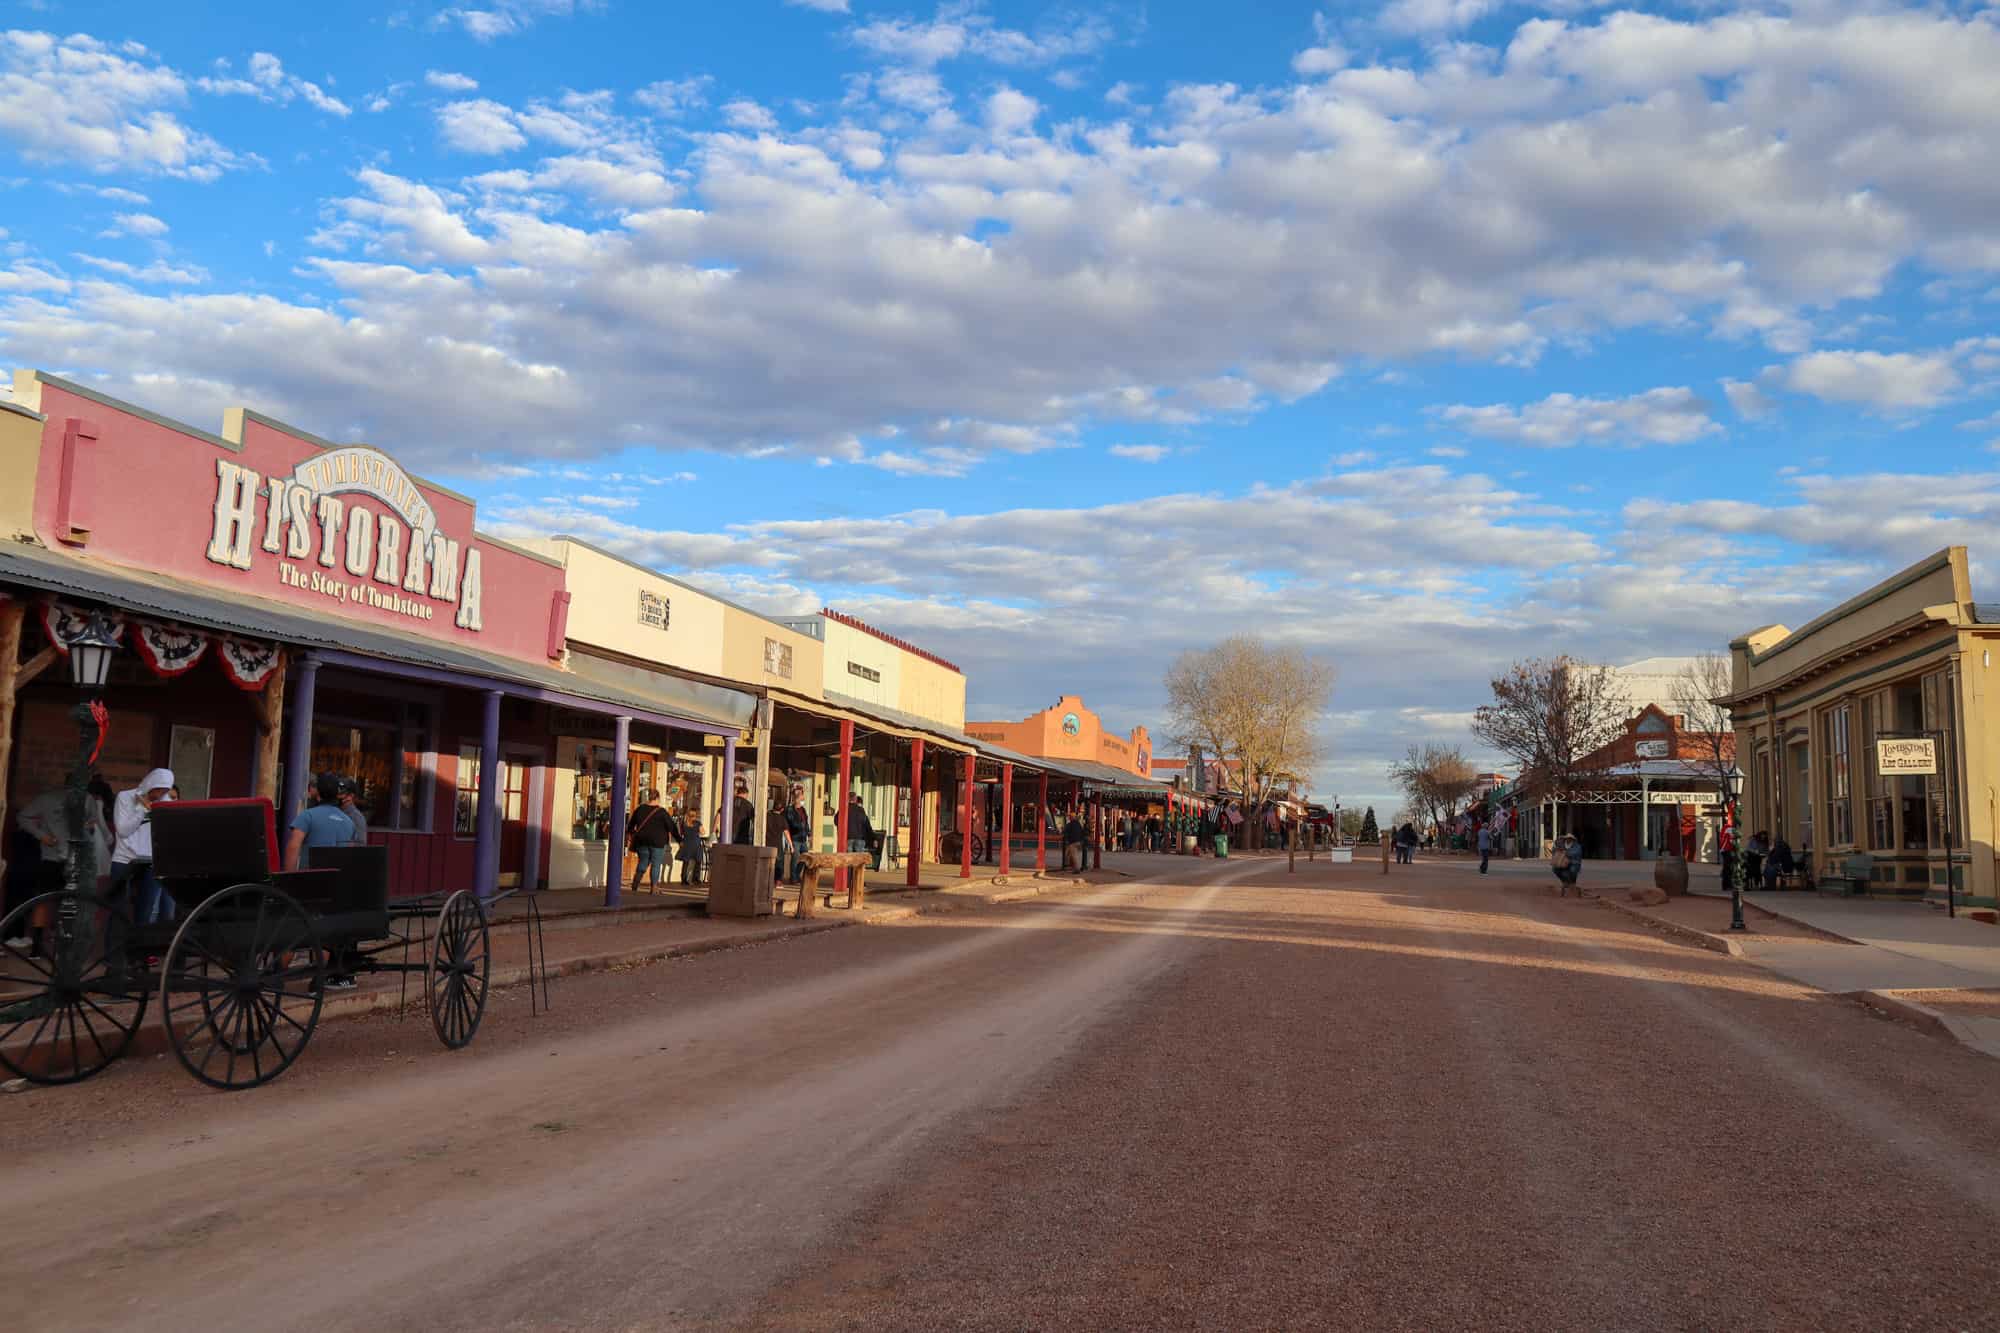 east allen street, the main street of tombstone, with beautiful sunset light - the perfect end to a scottsdale to tombstone trip